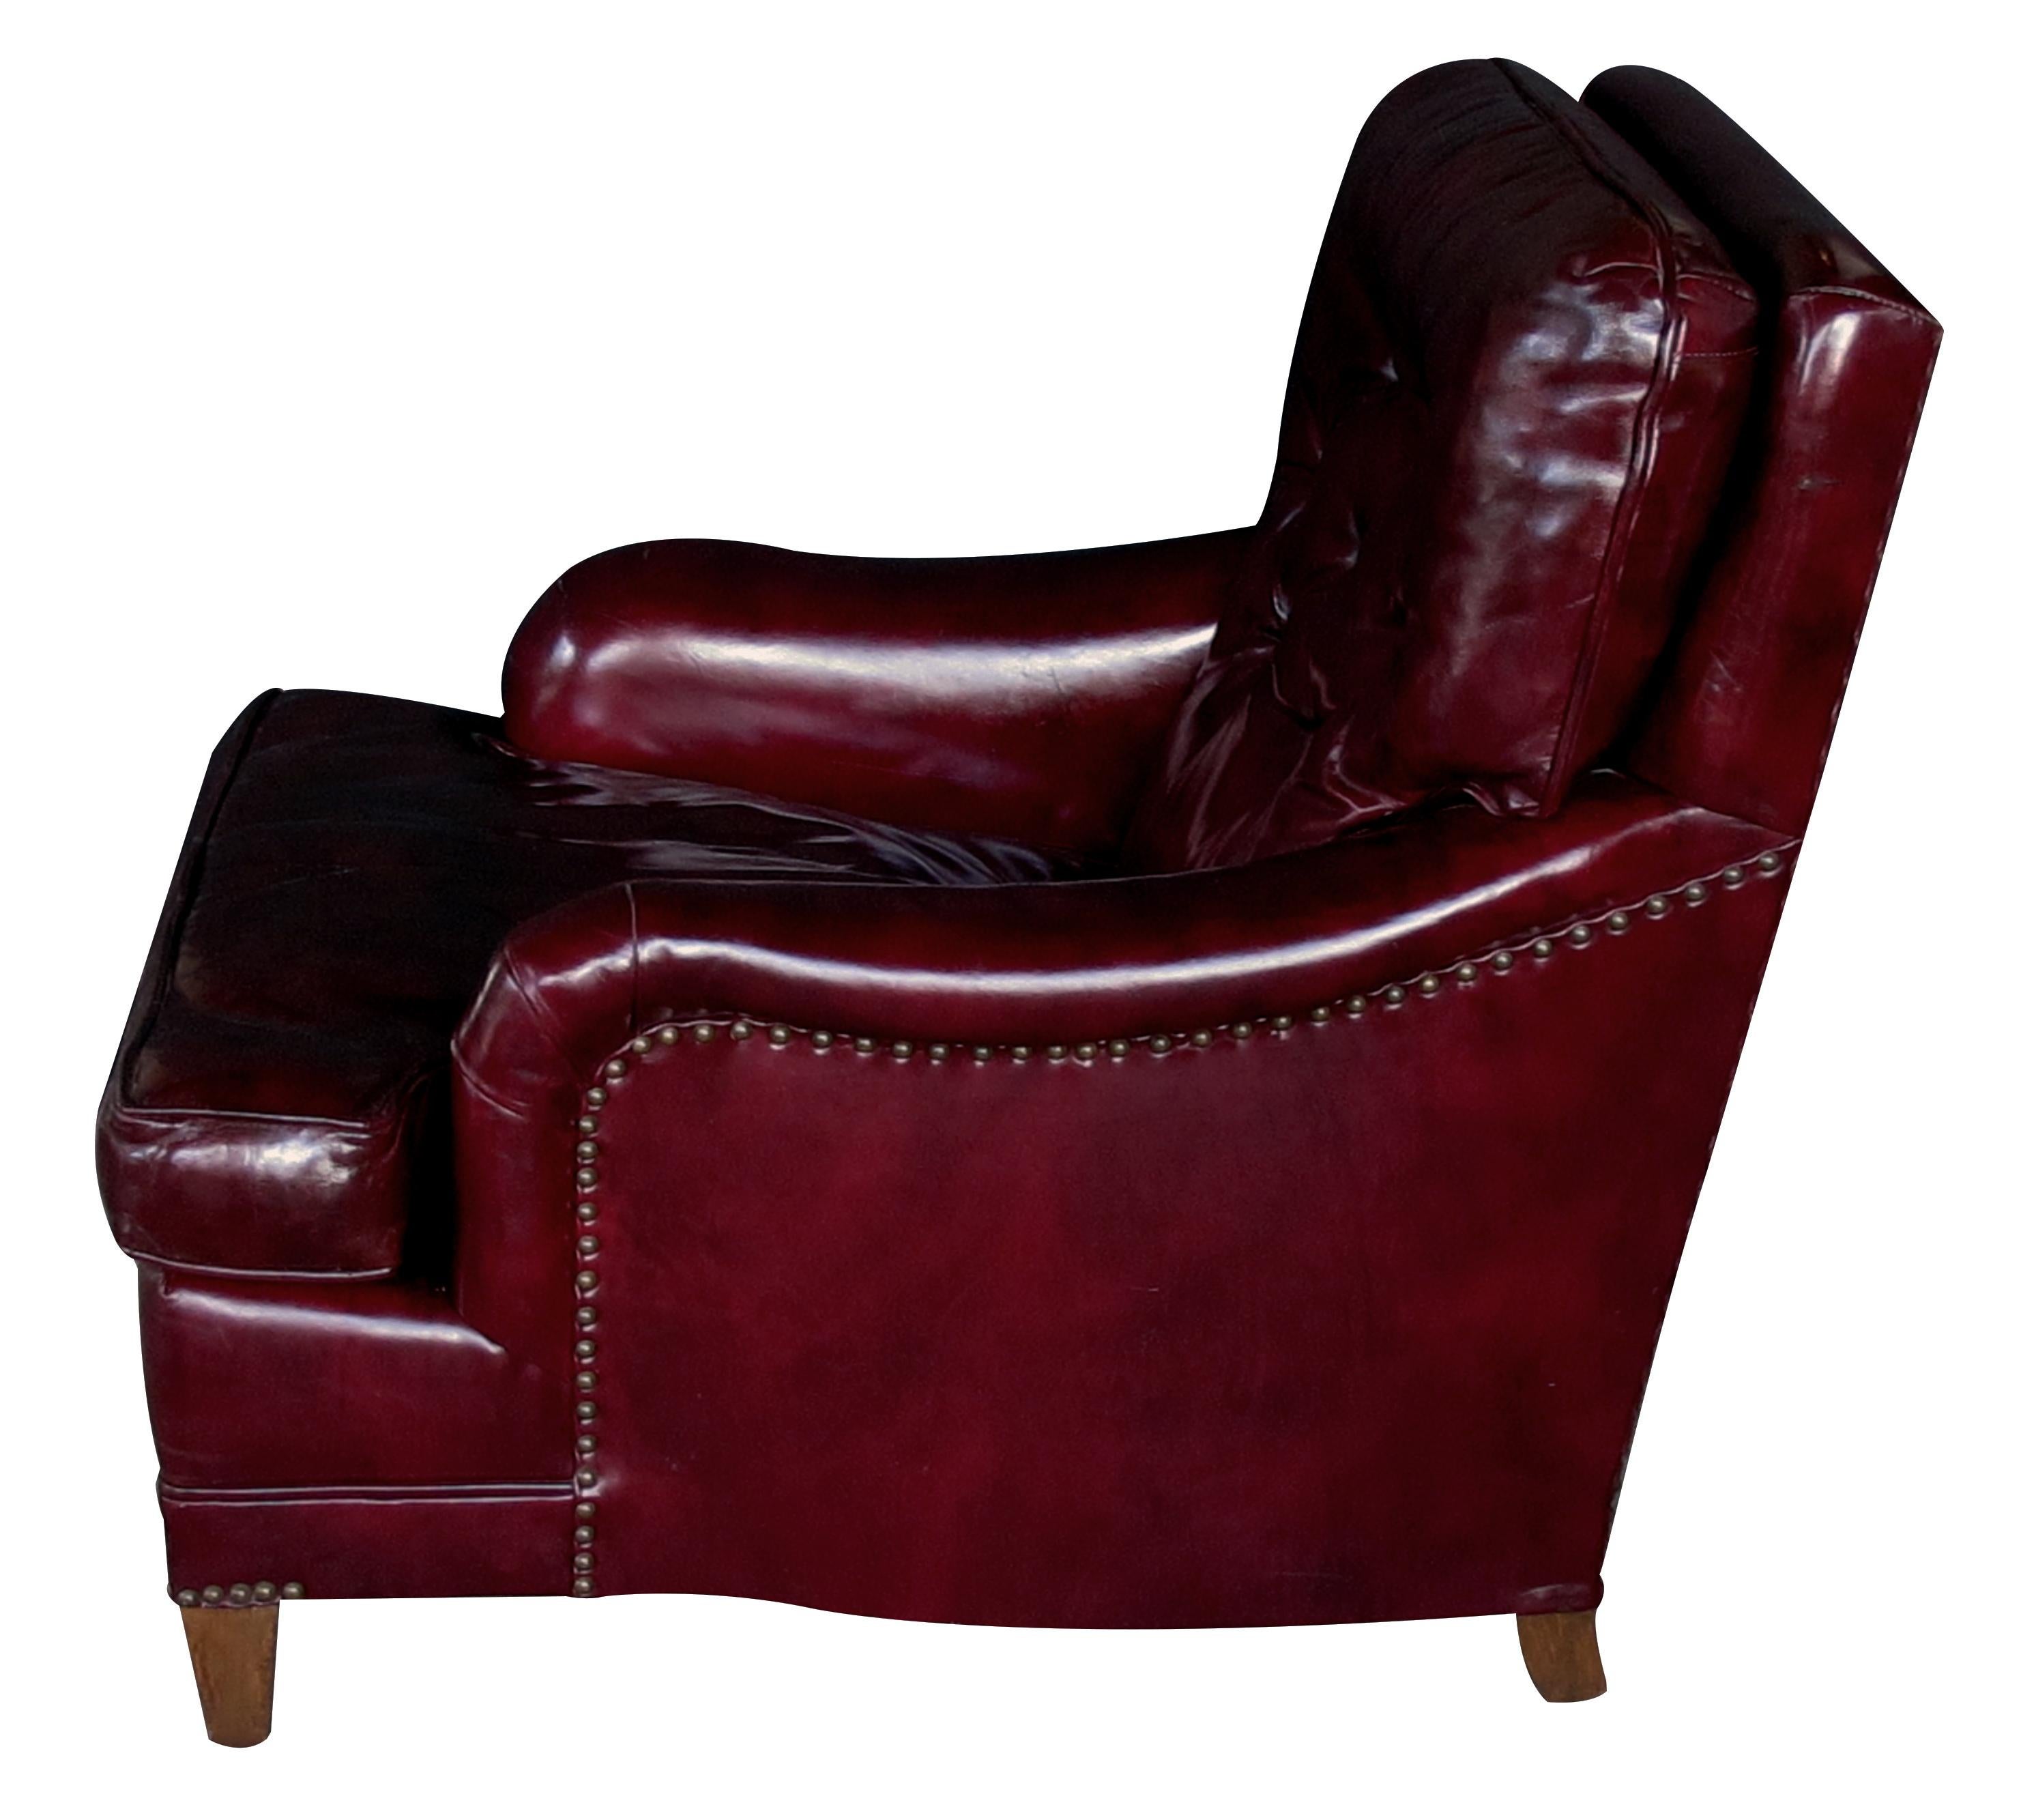 A handsome and comfortable American, 1940s chesterfield club chair and ottoman with deep burgundy leather; perfect for the den or library, the sumptuous club chair with tufted back and rolled arms; the matching ottoman with semi-detached cushion;